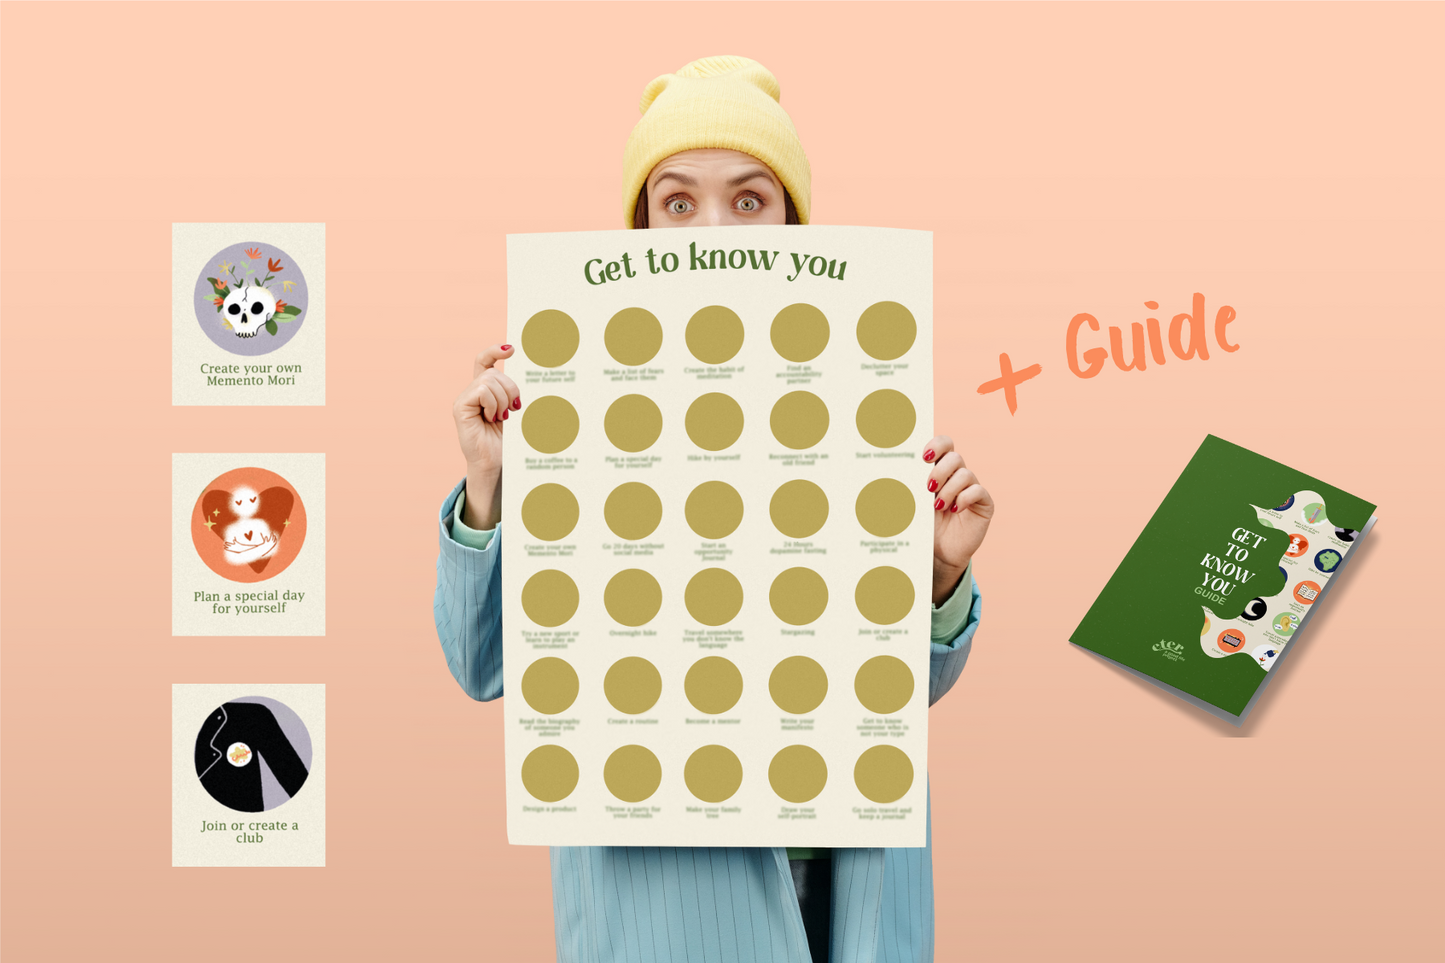 Scratch off Poster - 30 Adventures to Find Yourself + Guide. Perfect Meaningful Gift